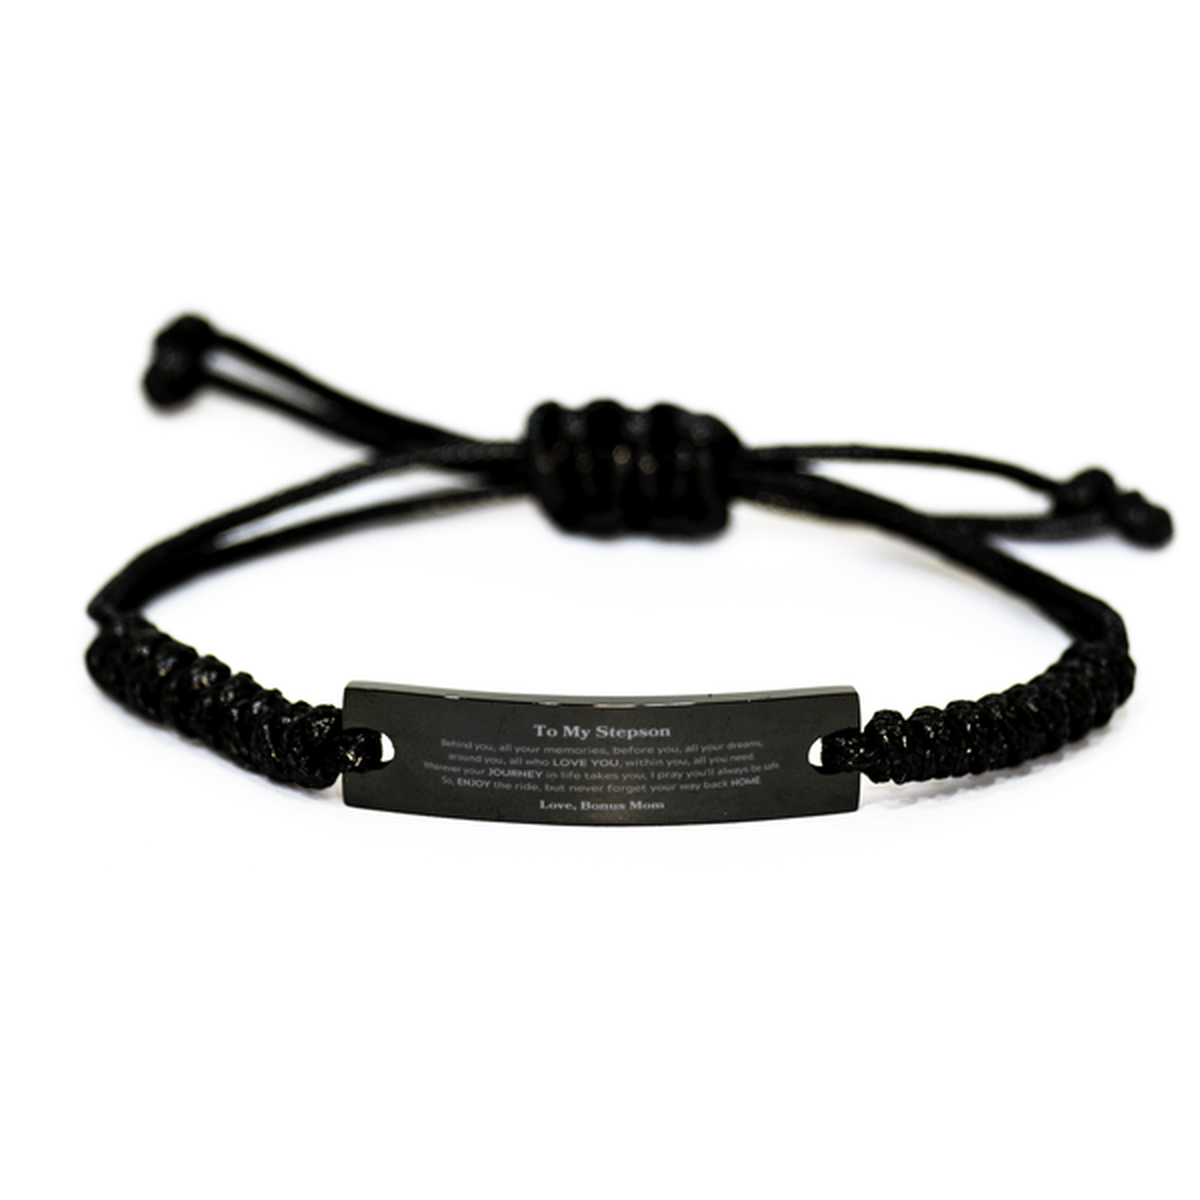 To My Stepson Graduation Gifts from Bonus Mom, Stepson Black Rope Bracelet Christmas Birthday Gifts for Stepson Behind you, all your memories, before you, all your dreams. Love, Bonus Mom